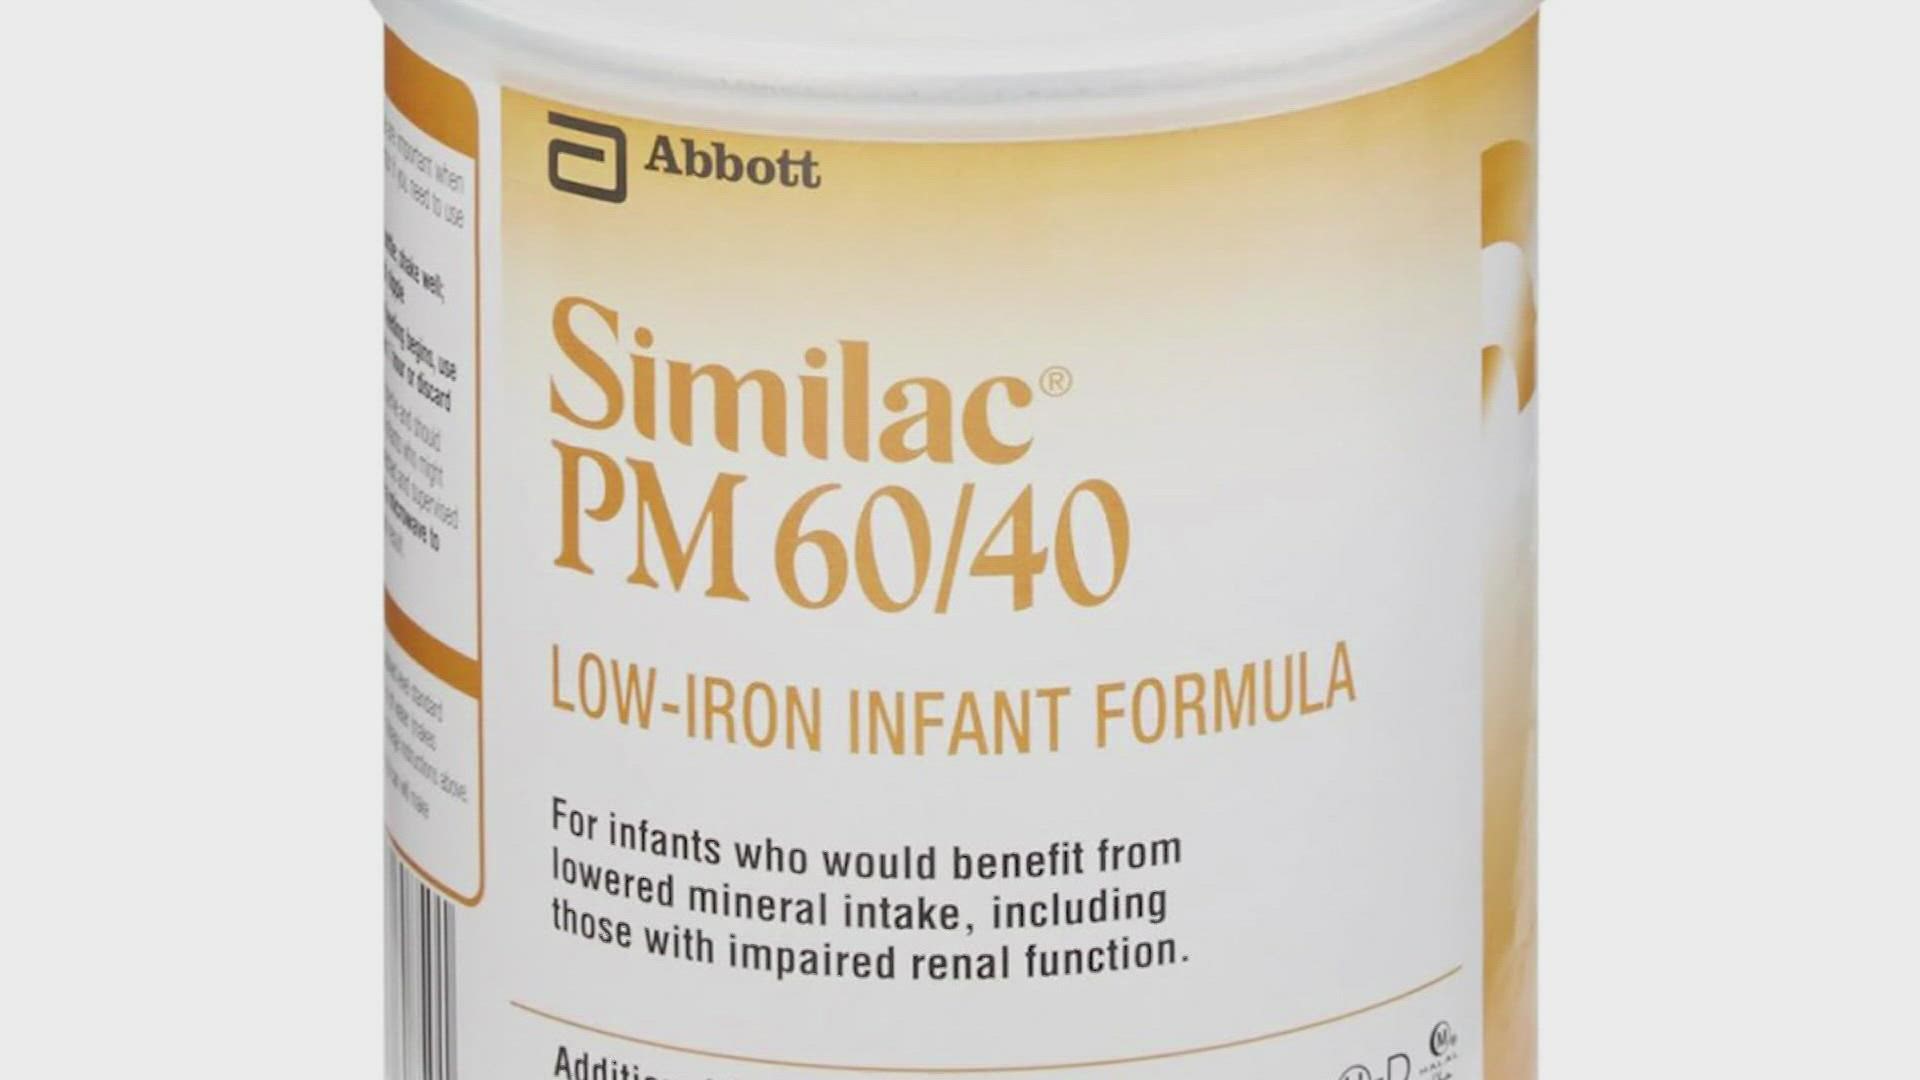 Abbott Nutrition is issuing a voluntary recall for some powdered baby formulas for some Similac PM 60/40 cans and cases made at a Michigan facility.